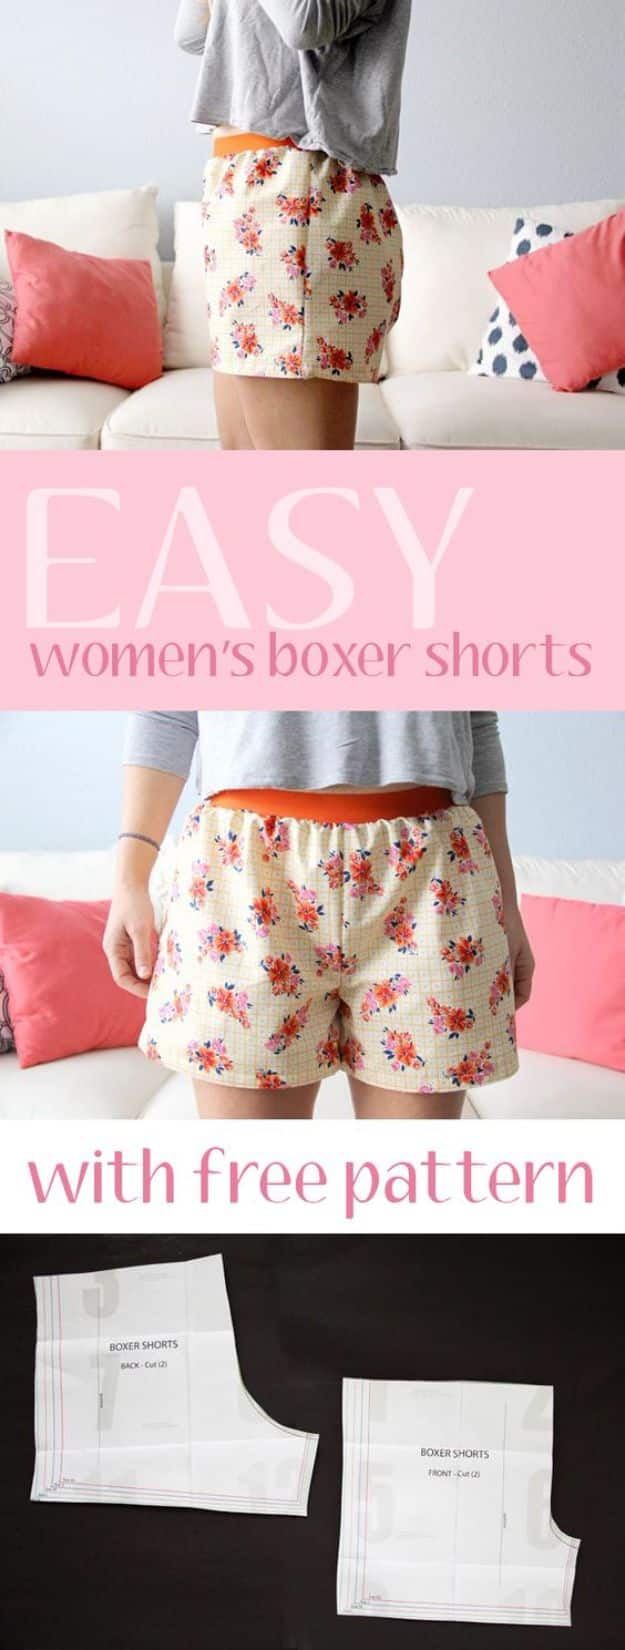 Cool Things To Sew For Summer - Easy Women's Boxer Shorts - Easy Dresses, Cute Skirts, Maxi Dress, Shorts, Pants and Tops 